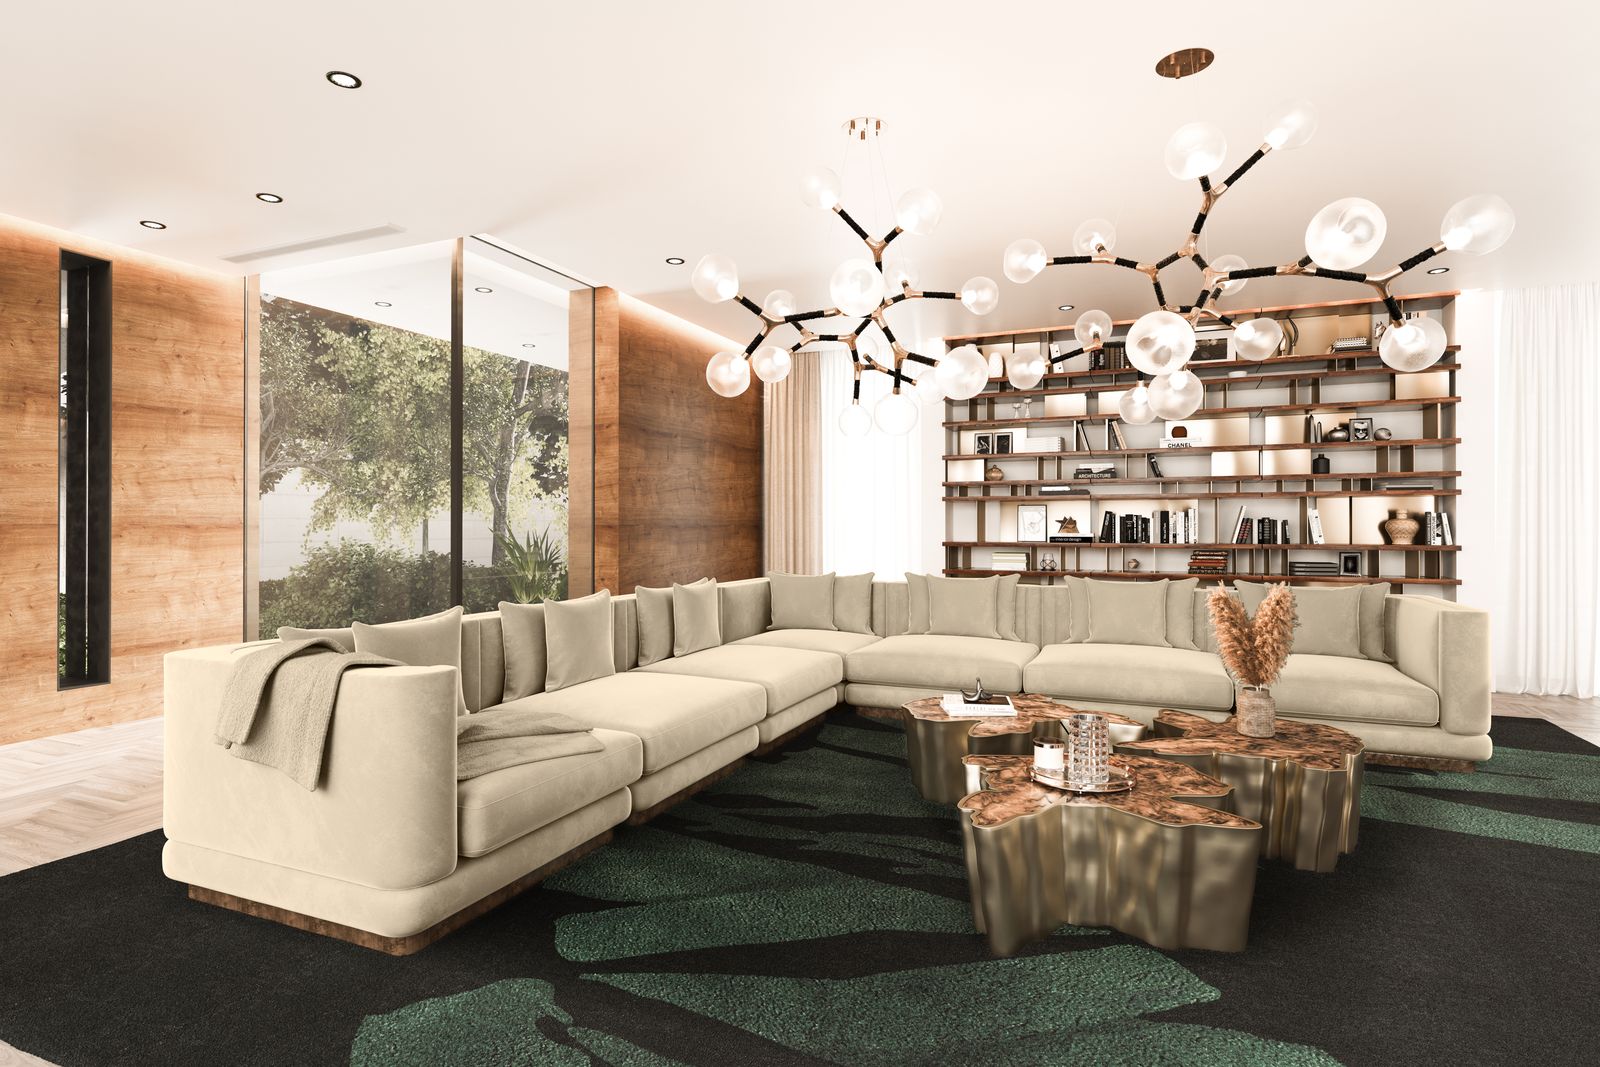 Exploring Interior Design Styles for a Modern Luxurious Residence